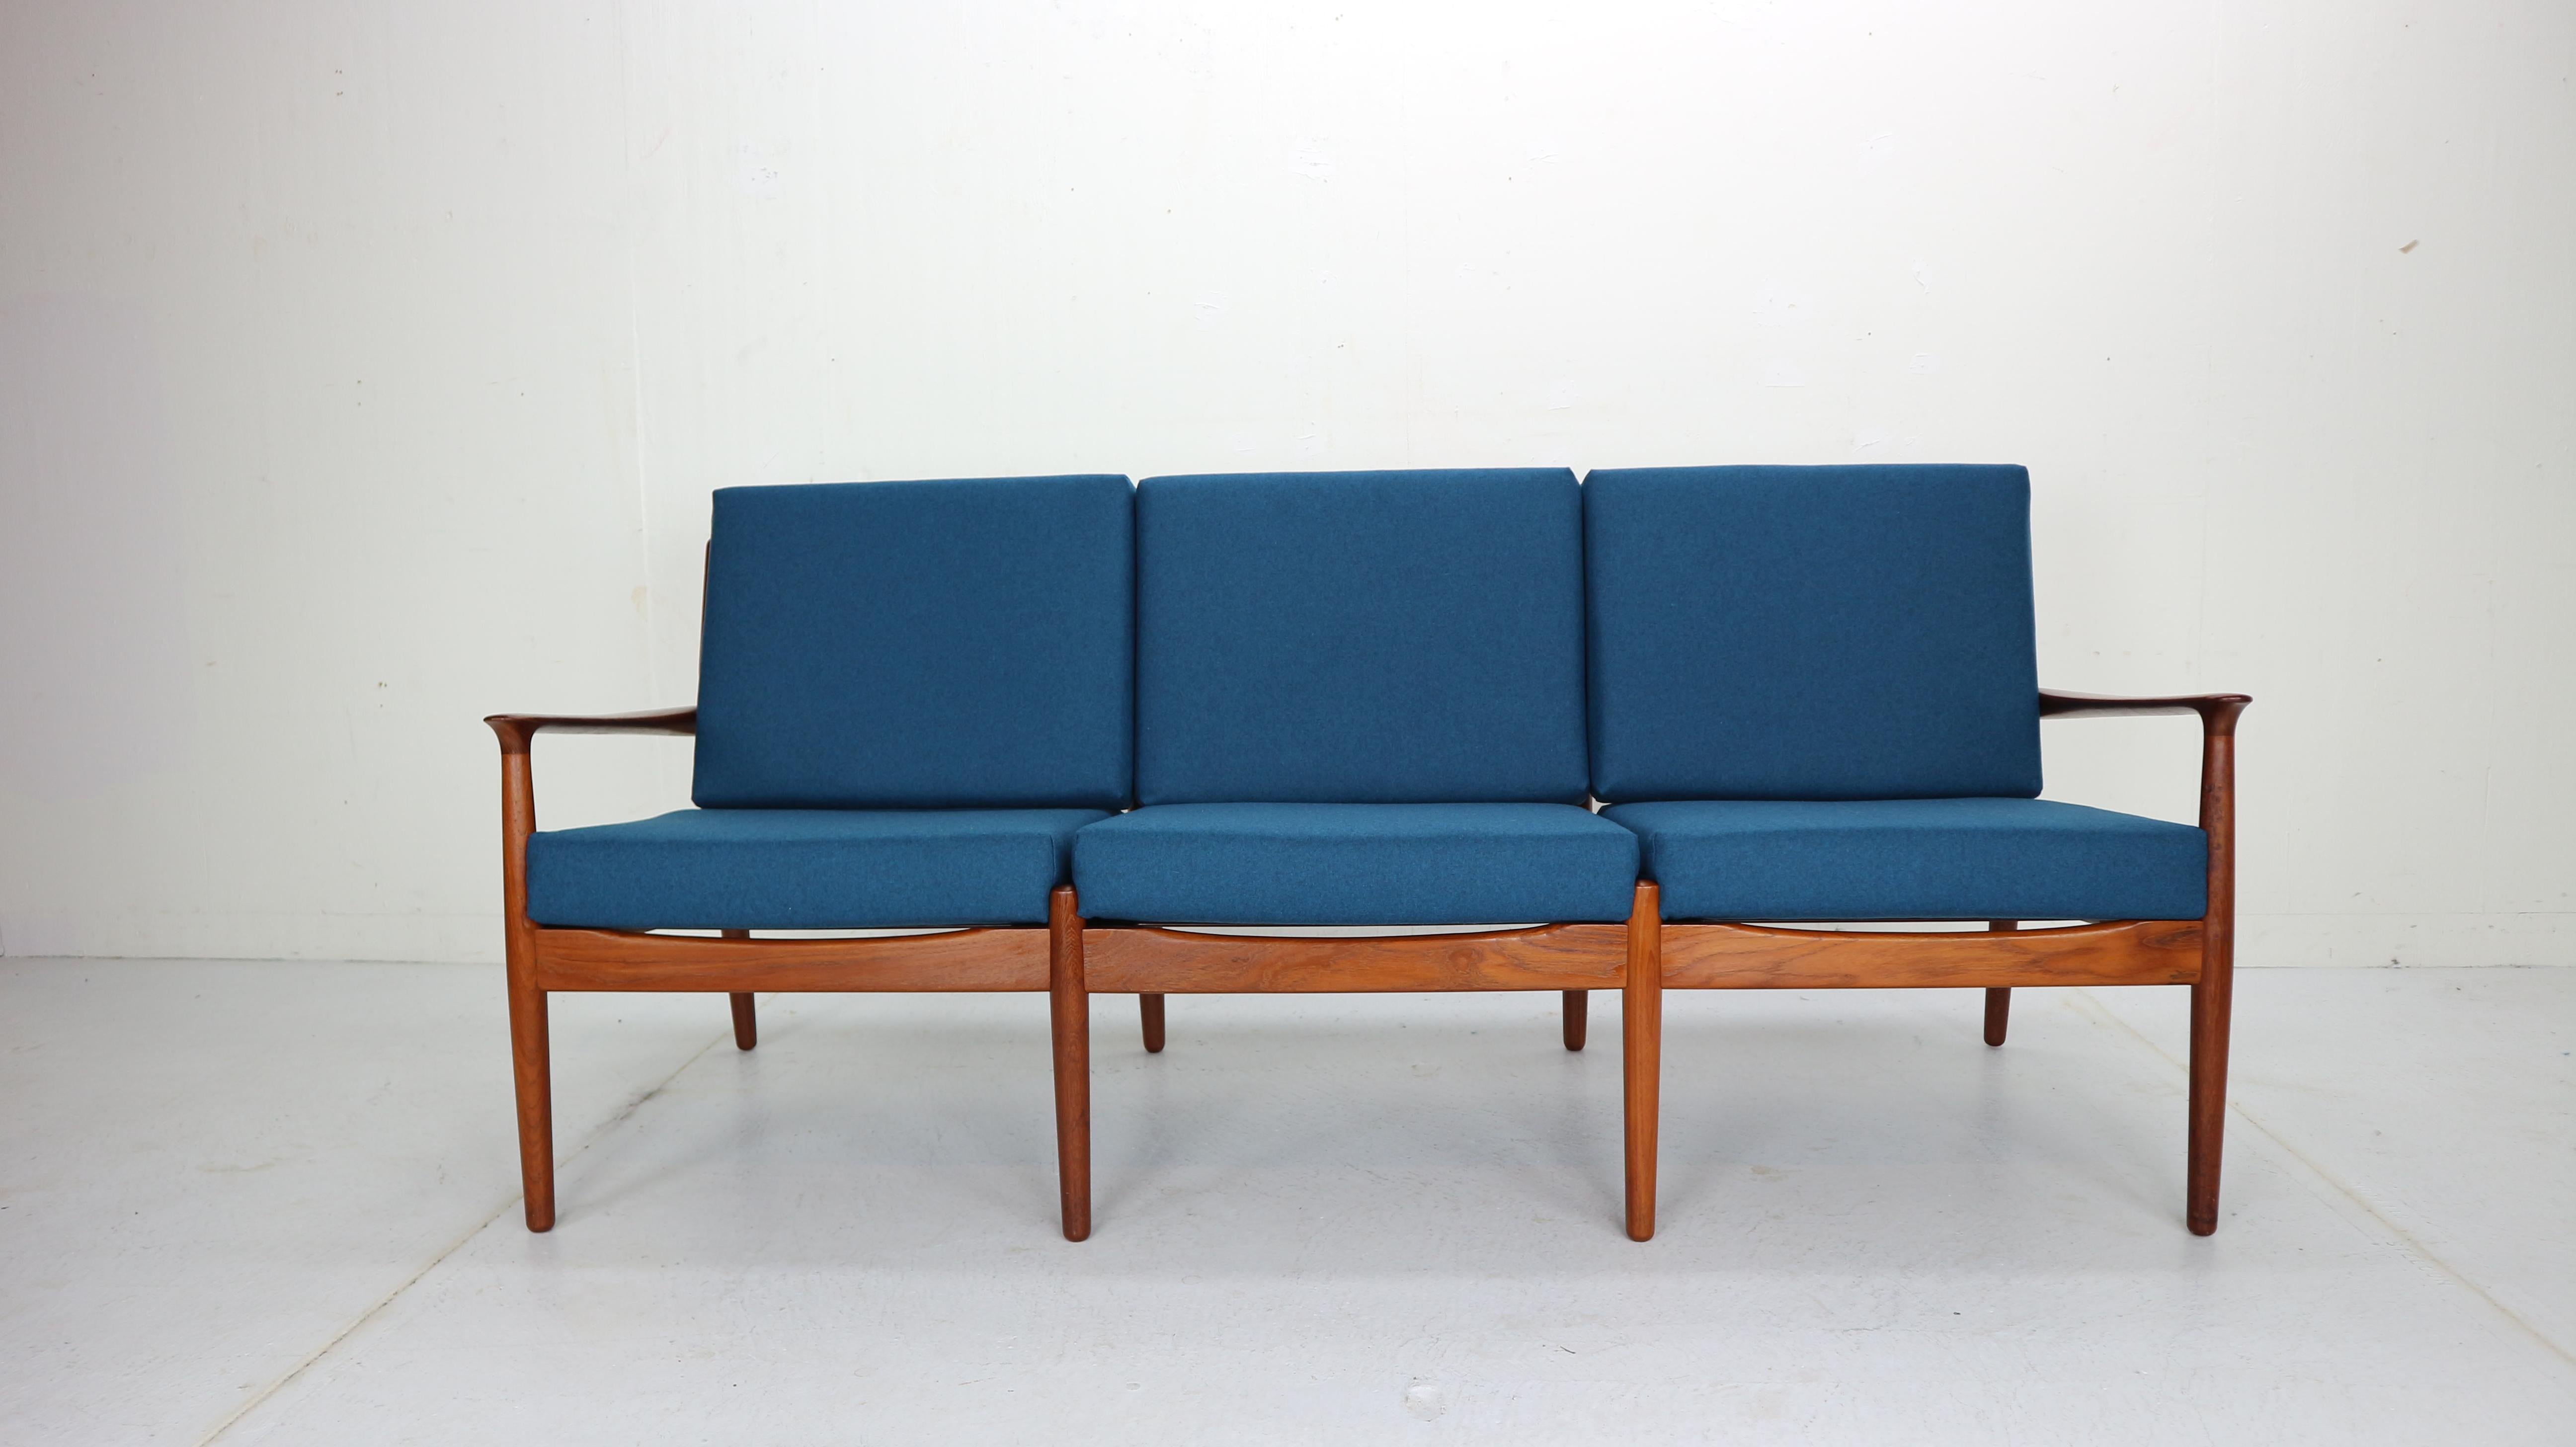 Scandinavian Modern design three-seat sofa designed by Grete Jalk and manufactured for Glostrup Møbelfabrik in 1960s period, Denmark.
Sculpted frame, back and armrests are made from solid teak wood.
The seating has been newly upholstered with a